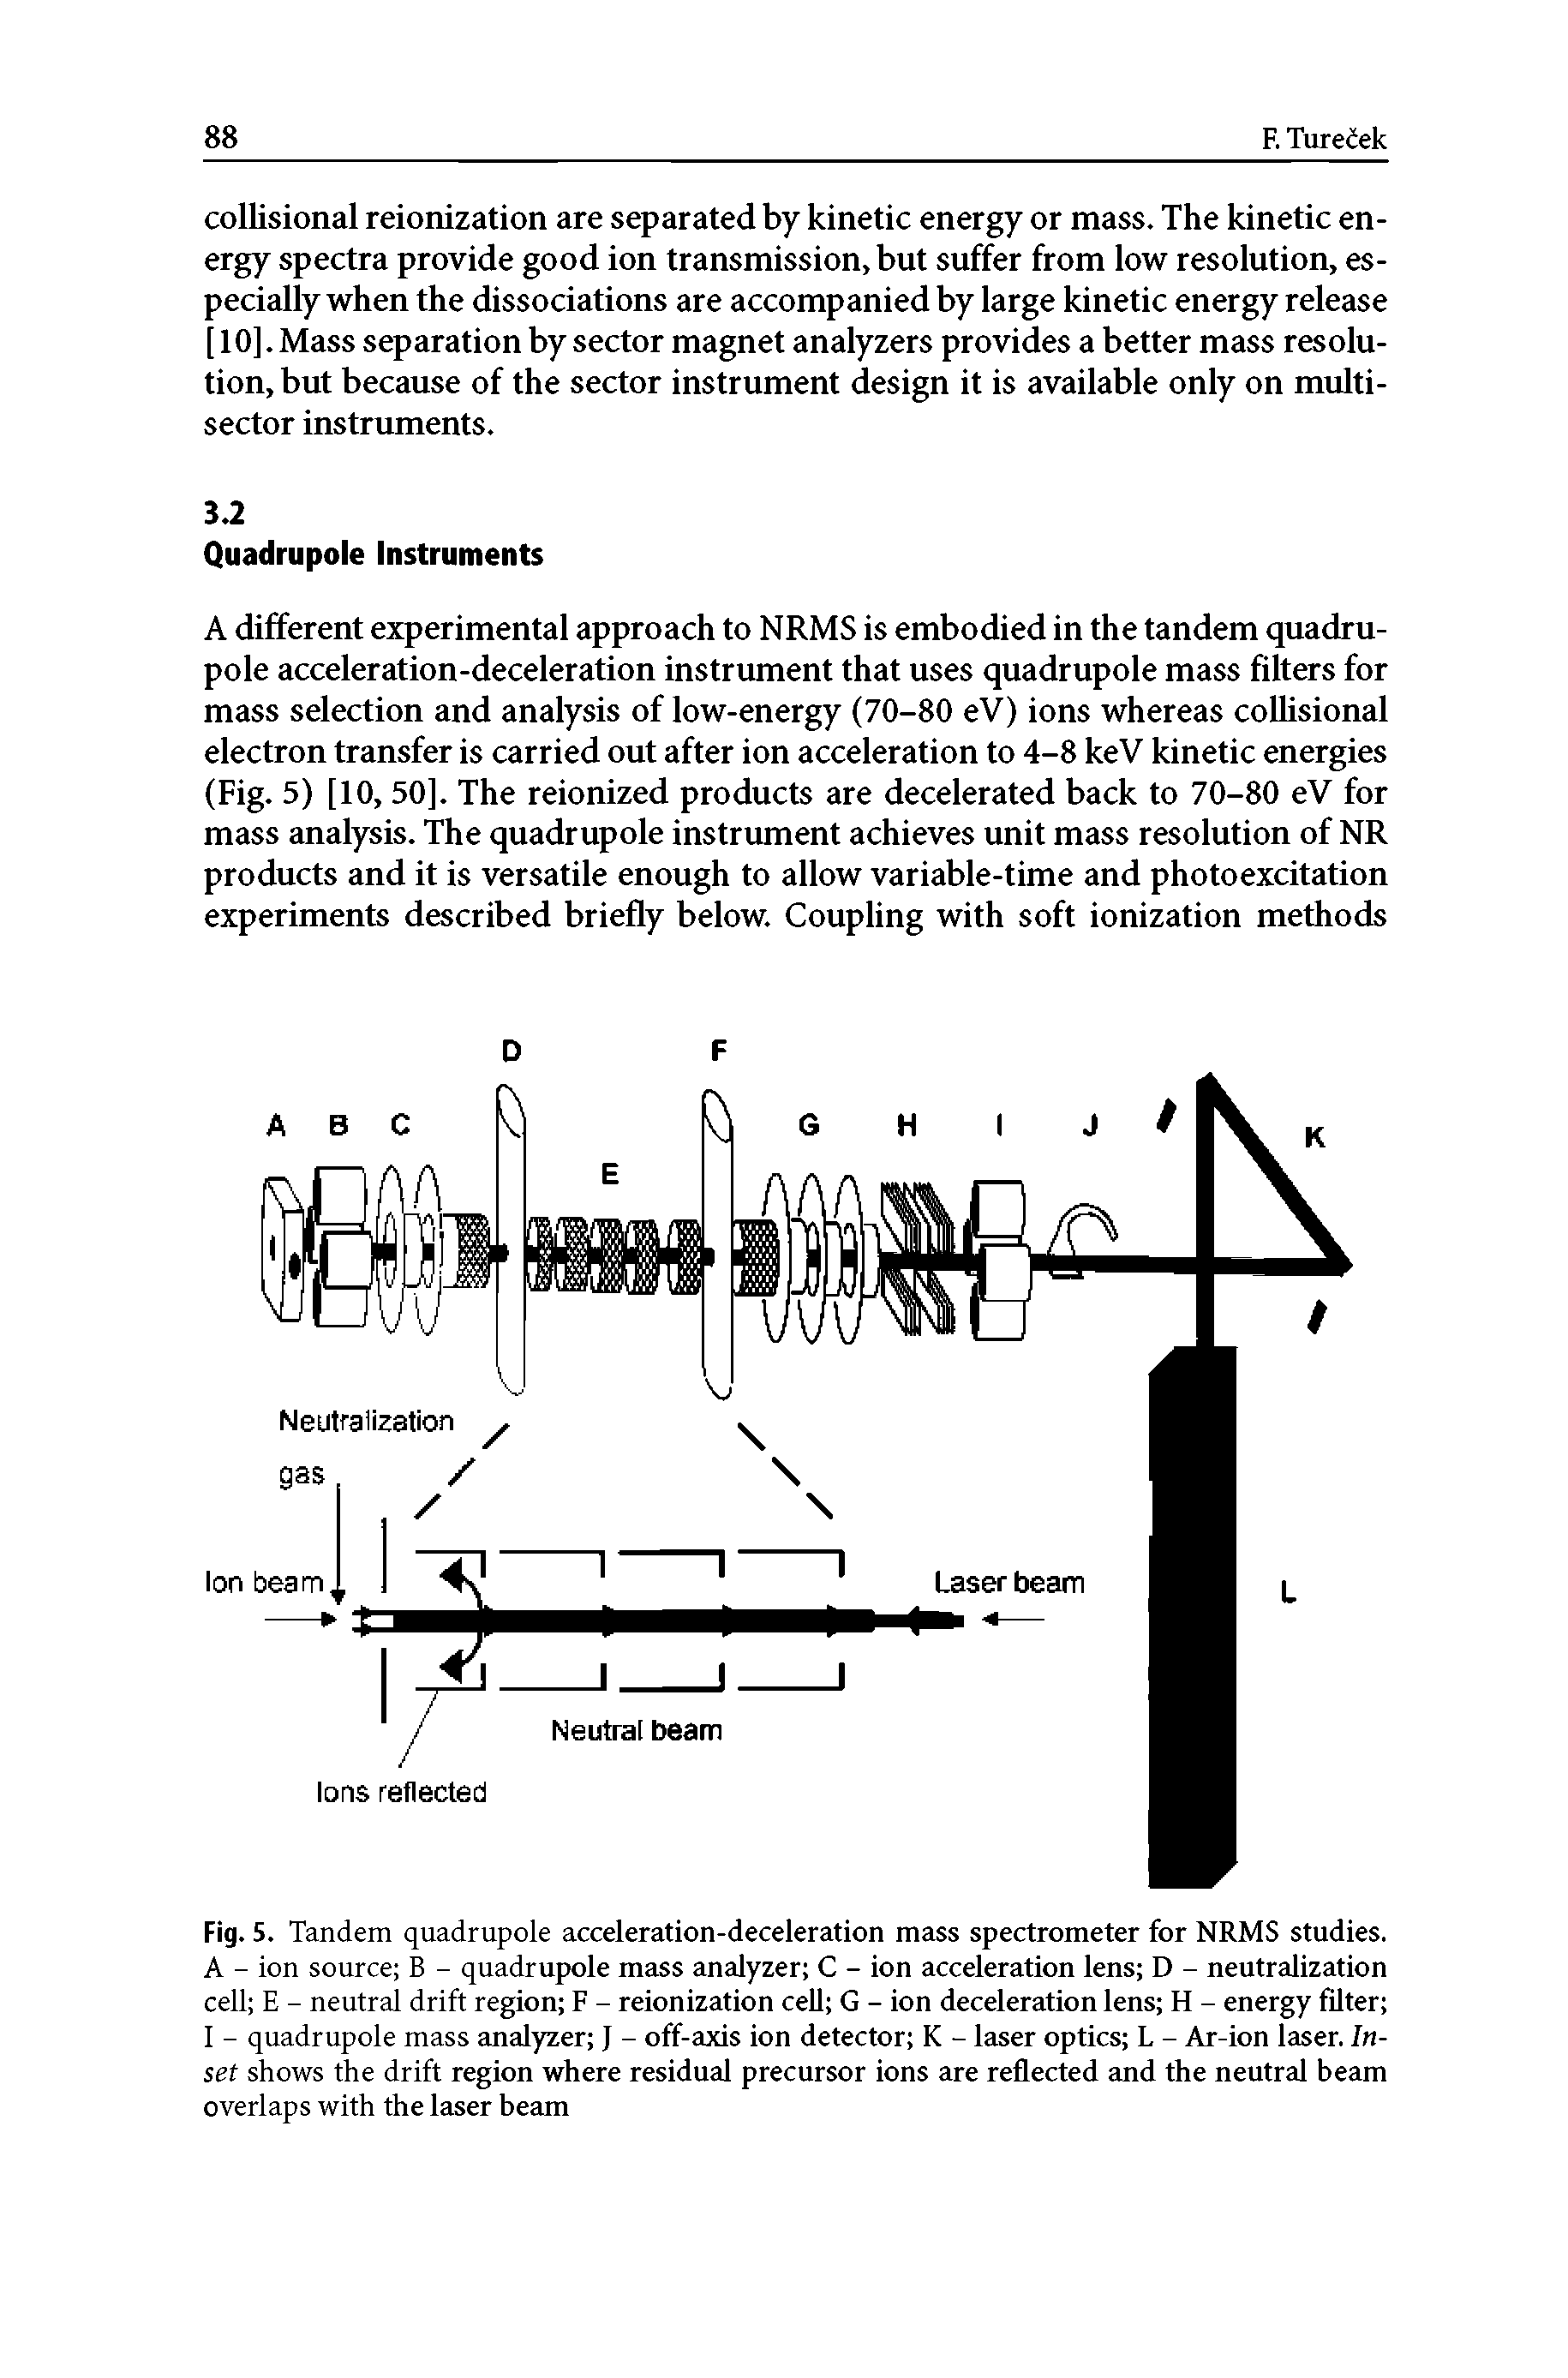 Fig. 5. Tandem quadrupole acceleration-deceleration mass spectrometer for NRMS studies. A - ion source B - quadrupole mass analyzer C - ion acceleration lens D - neutralization cell E - neutral drift region F - reionization cell G - ion deceleration lens H - energy filter I - quadrupole mass analyzer J - off-axis ion detector K - laser optics L - Ar-ion laser. Inset shows the drift region where residual precursor ions are reflected and the neutral beam overlaps with the laser beam...